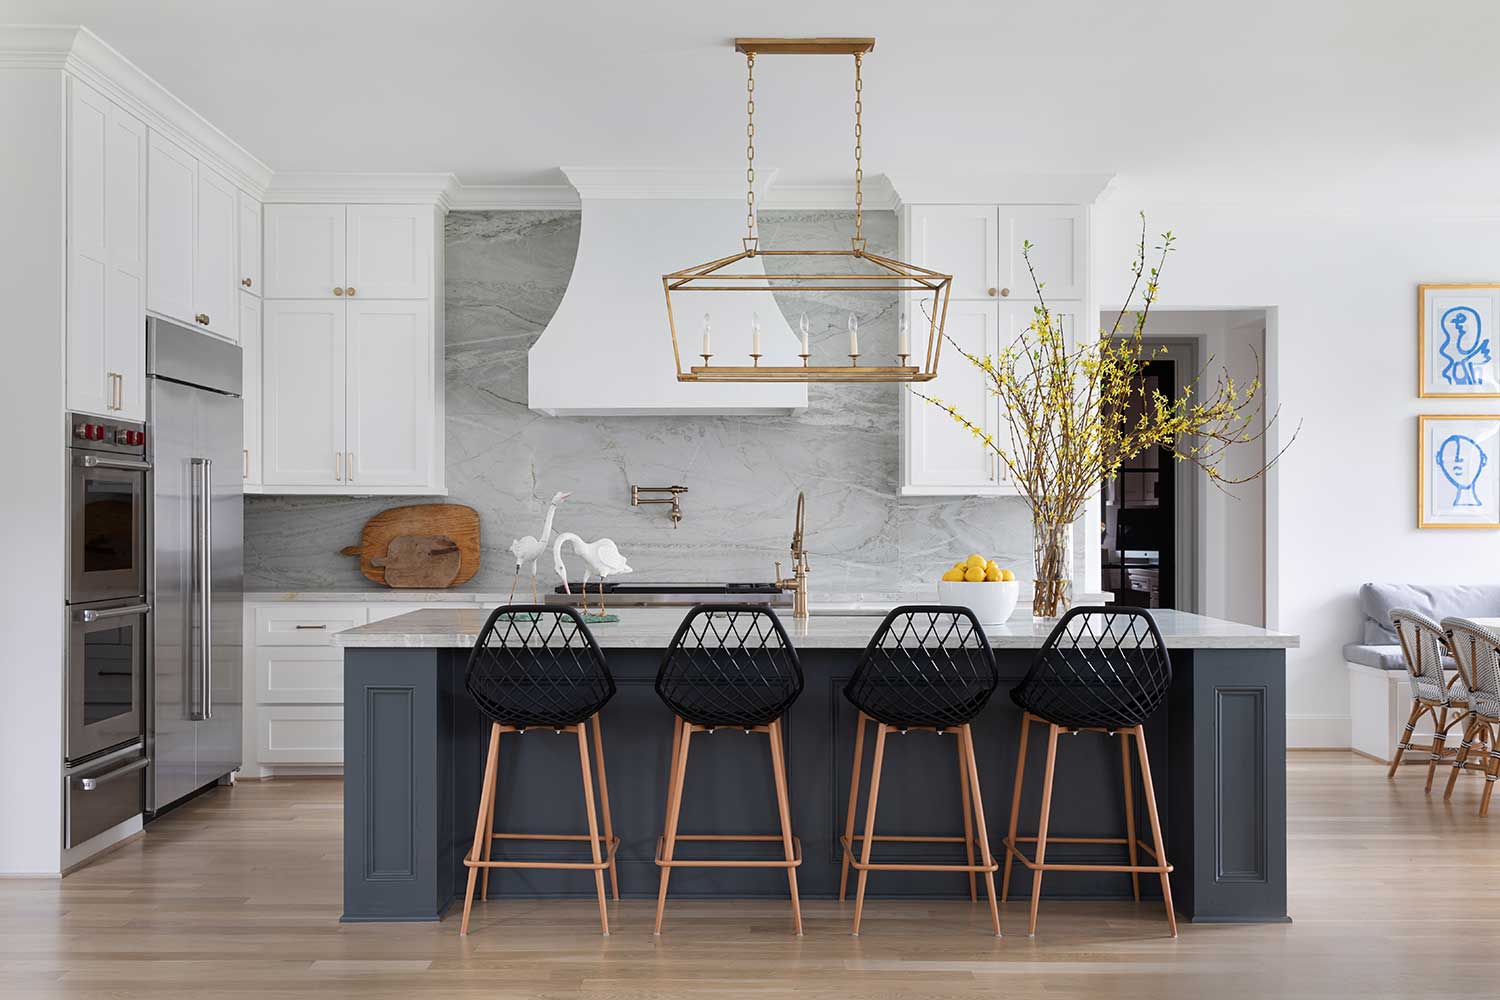 25 Kitchen Designs Designers Can't Get Enough Of